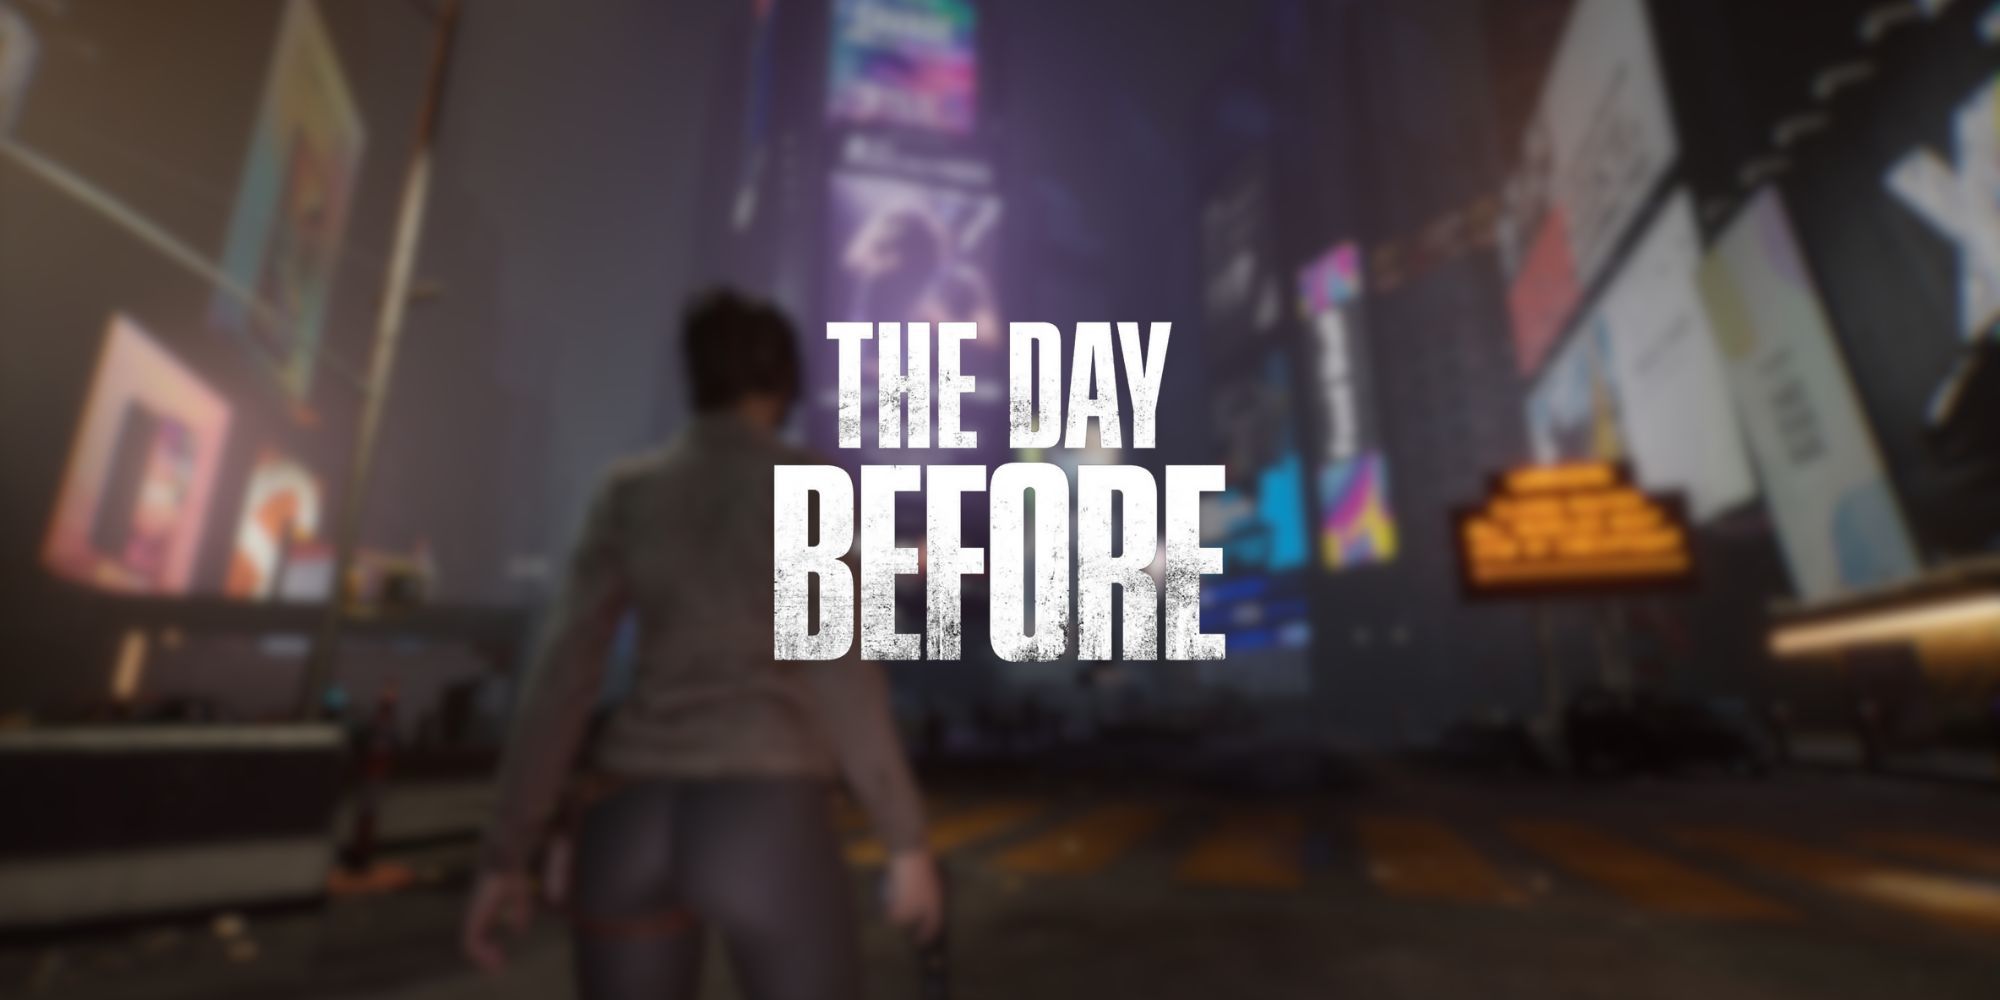 The Day Before Release Date Announced Along With Their Final